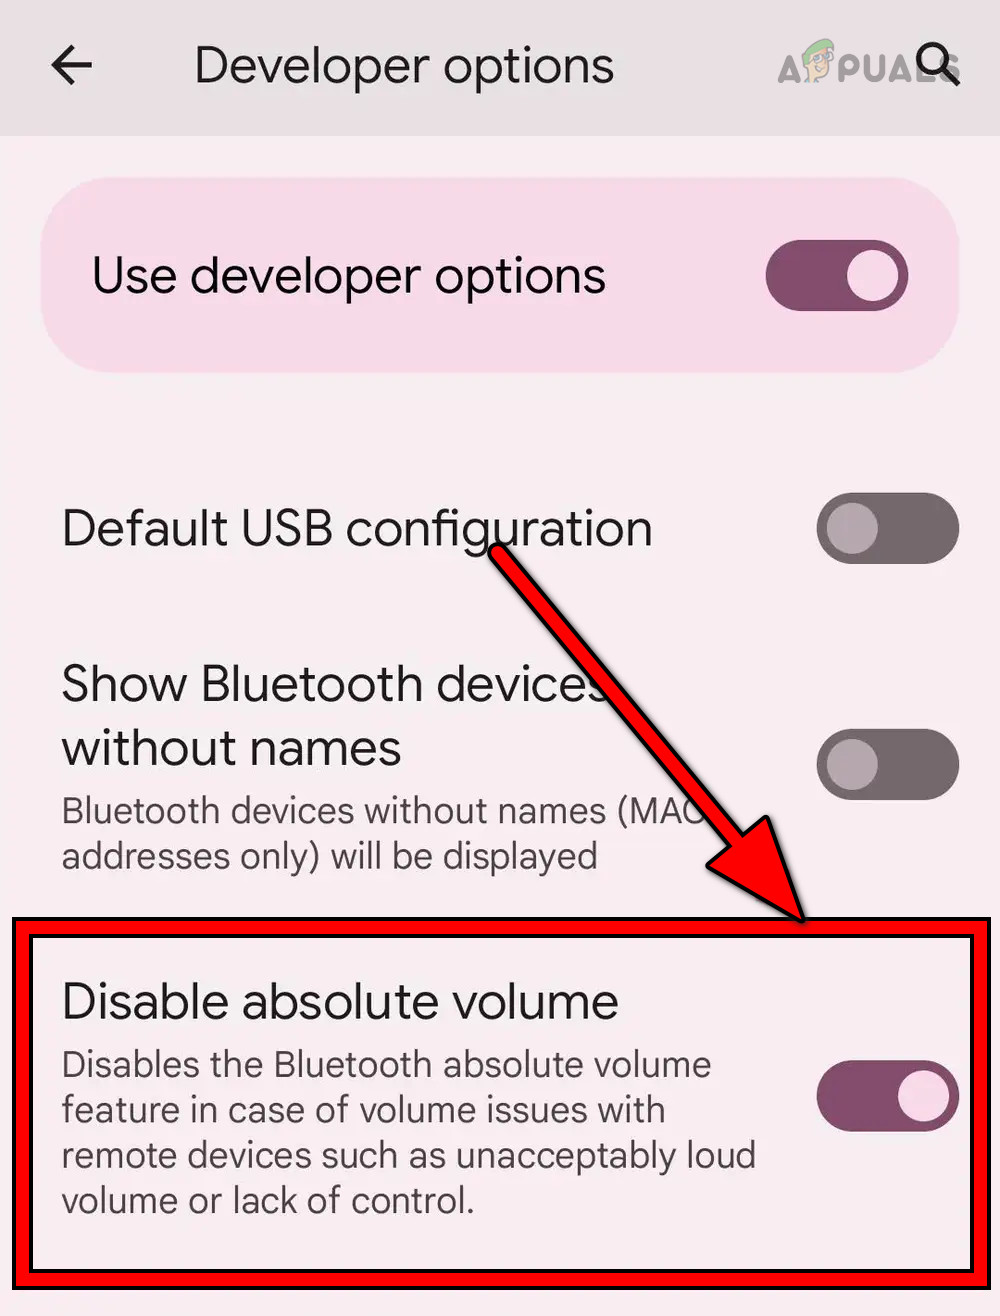 Disable Absolute Volume in the Android's Developer Options